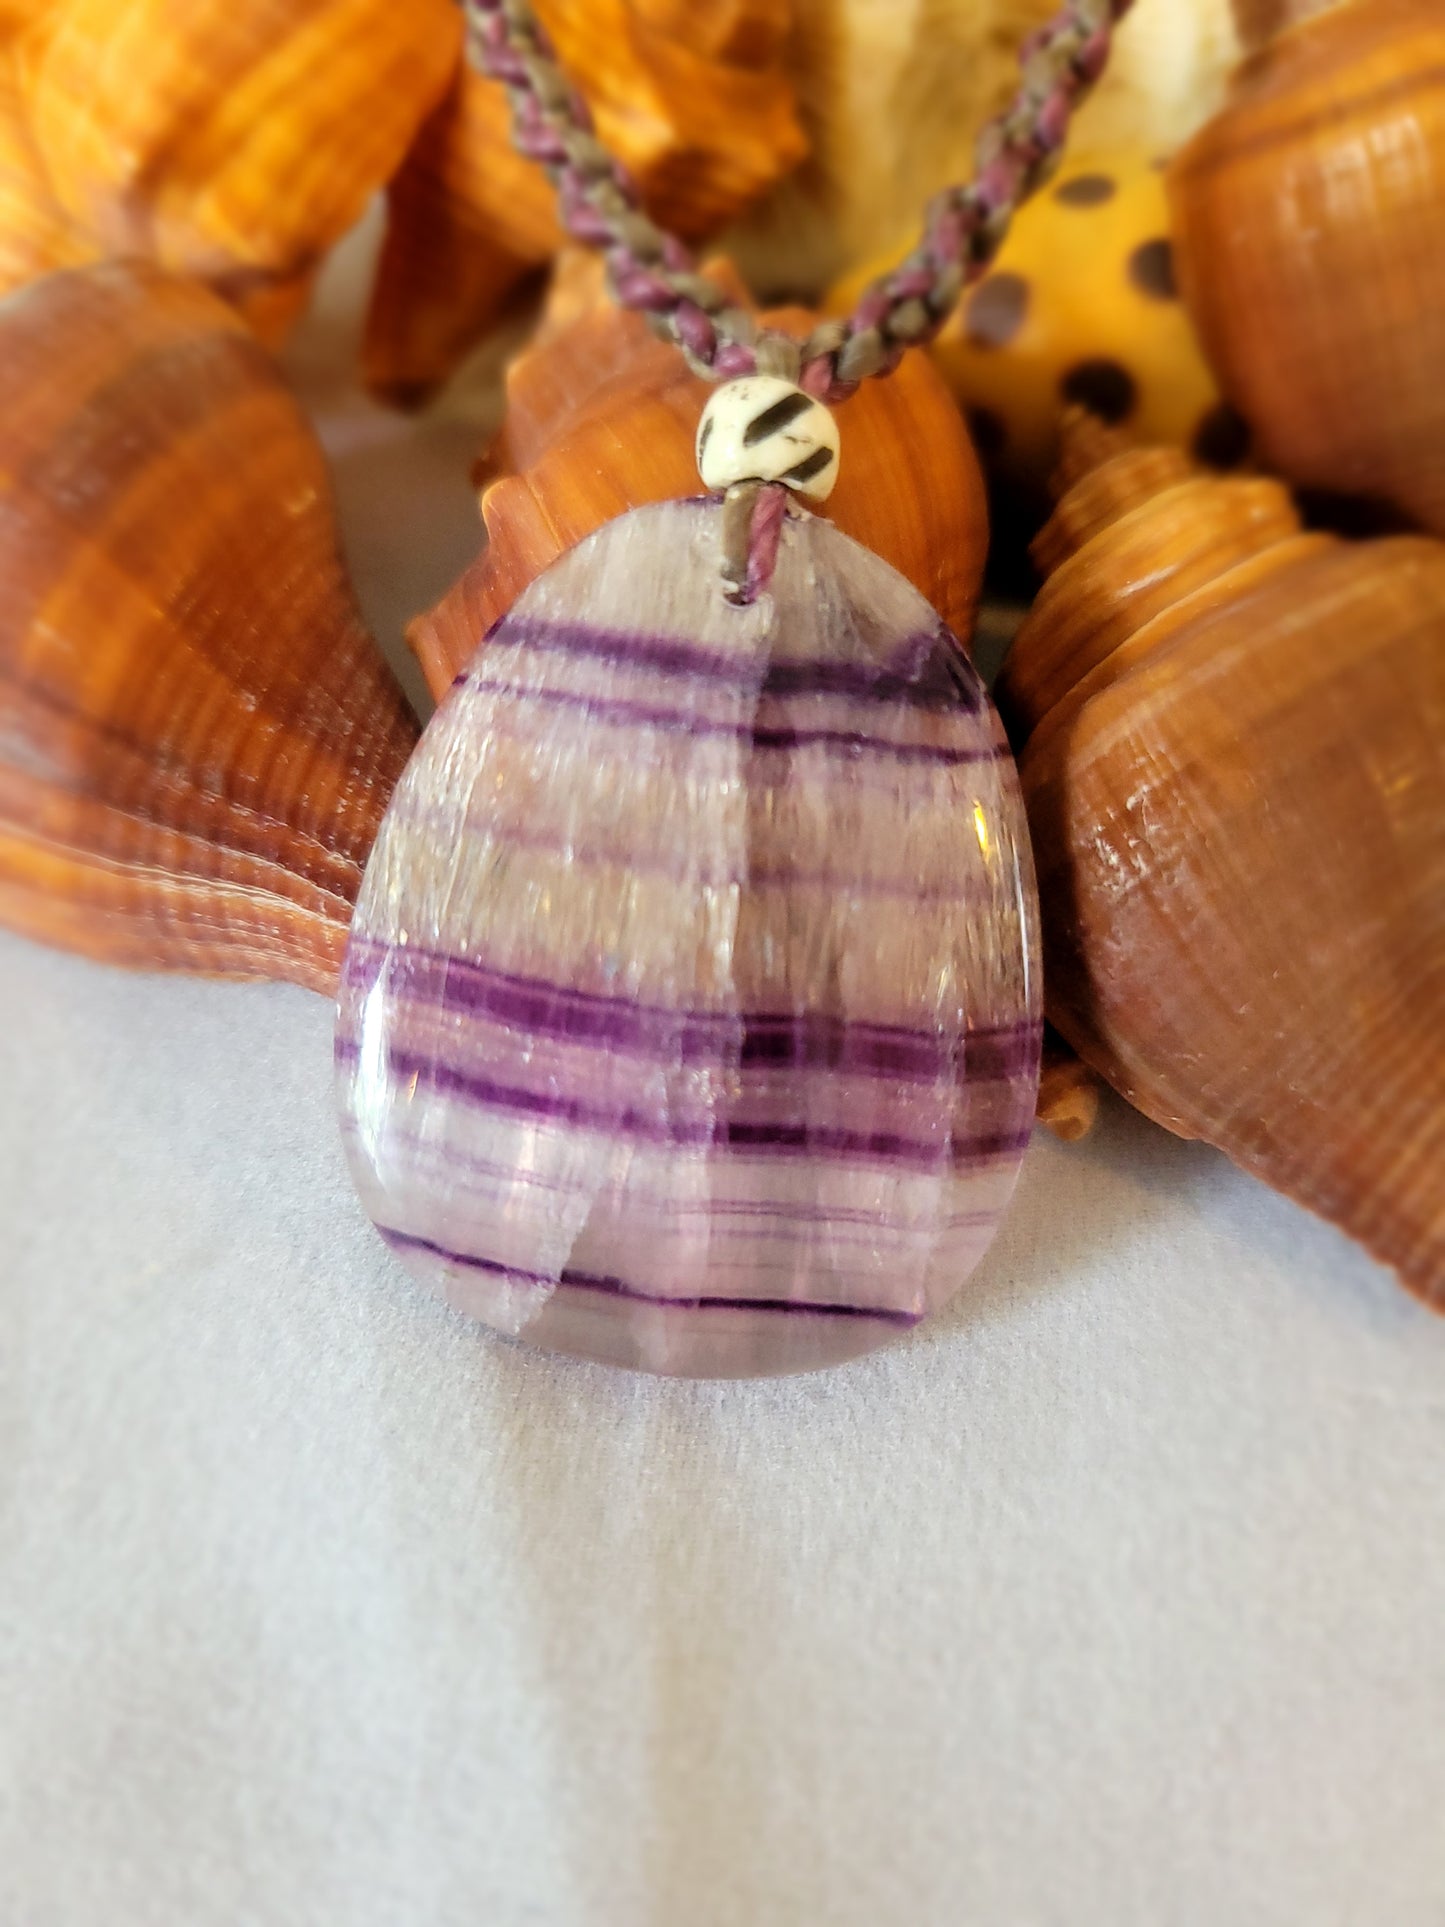 Banded Fluorite Pendant Necklace - Purple & Pink Hues with Glass Bead Accents